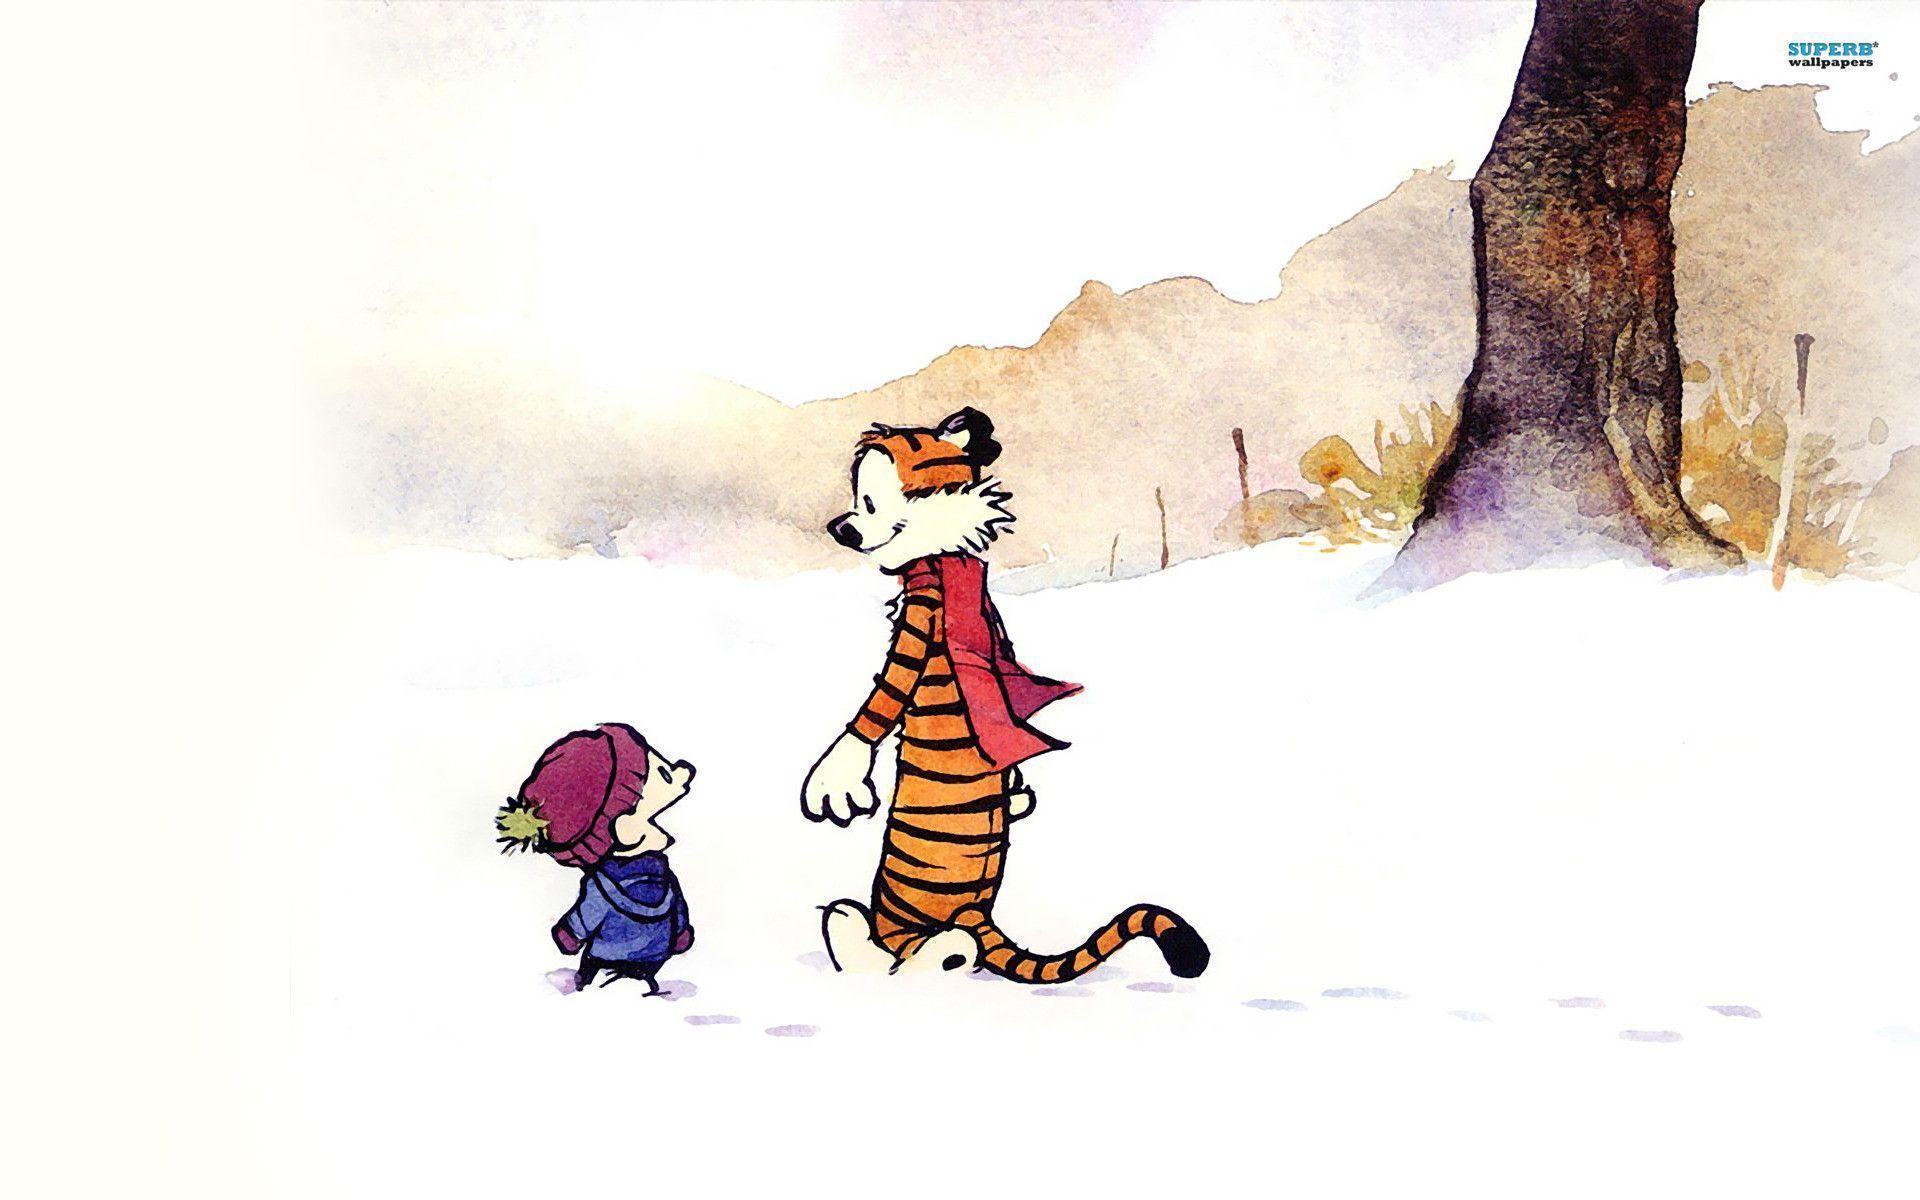 Featured image of post Wallpaper Calvin And Hobbes Background 1813x1080 size 324kb view download more comics wallpapers